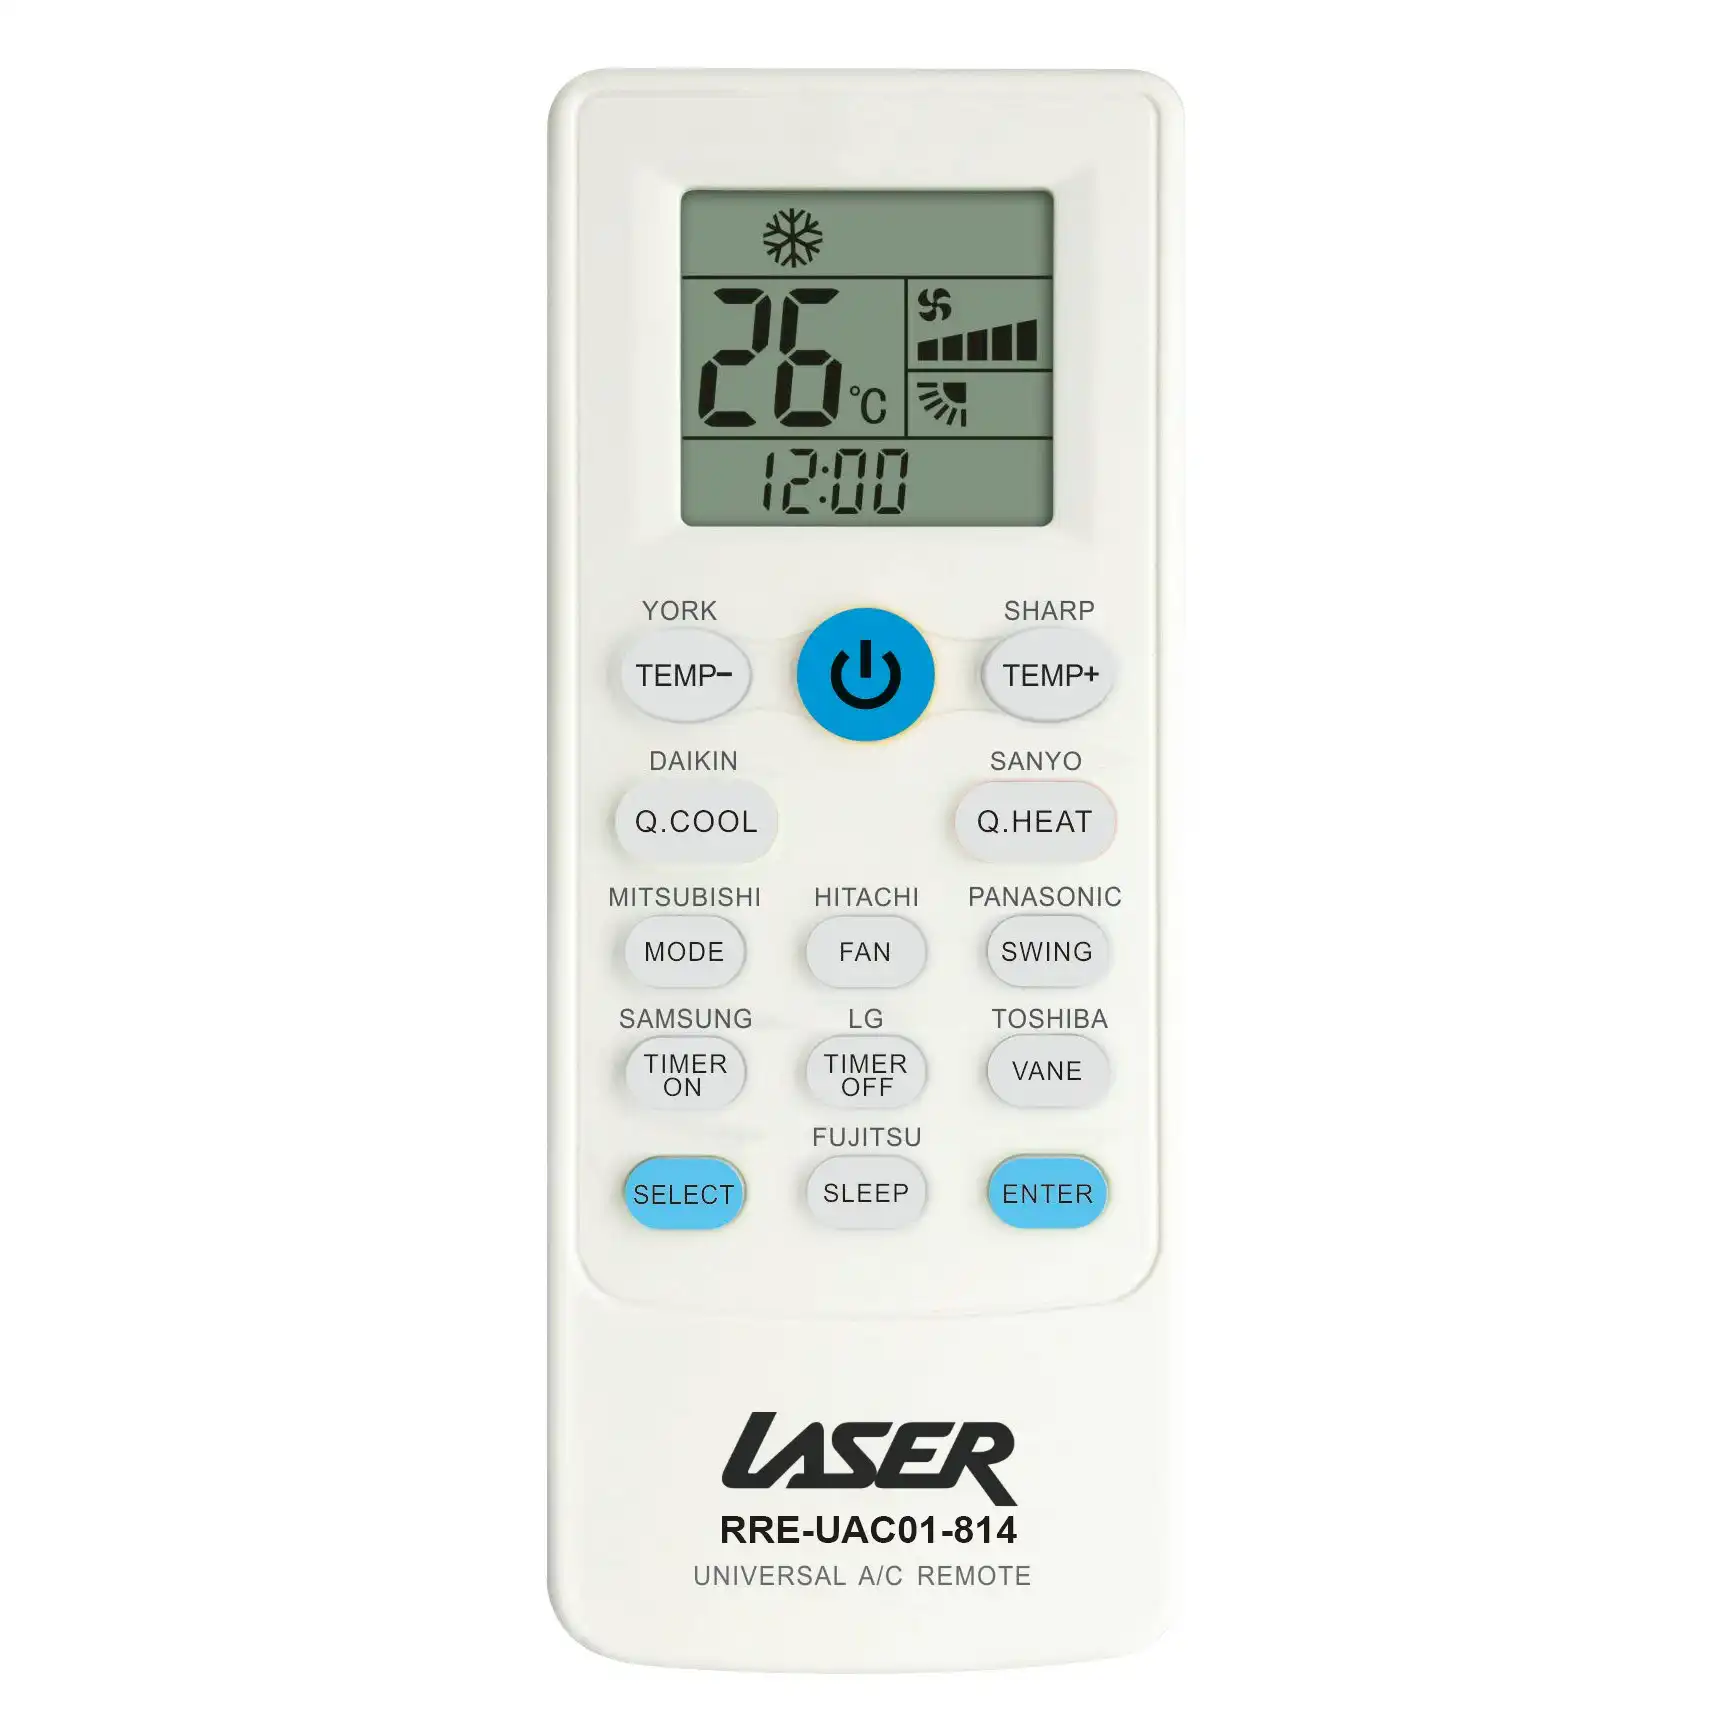 Laser Universal A/C Remote: Quick 2-Button Setup for All Major Brands